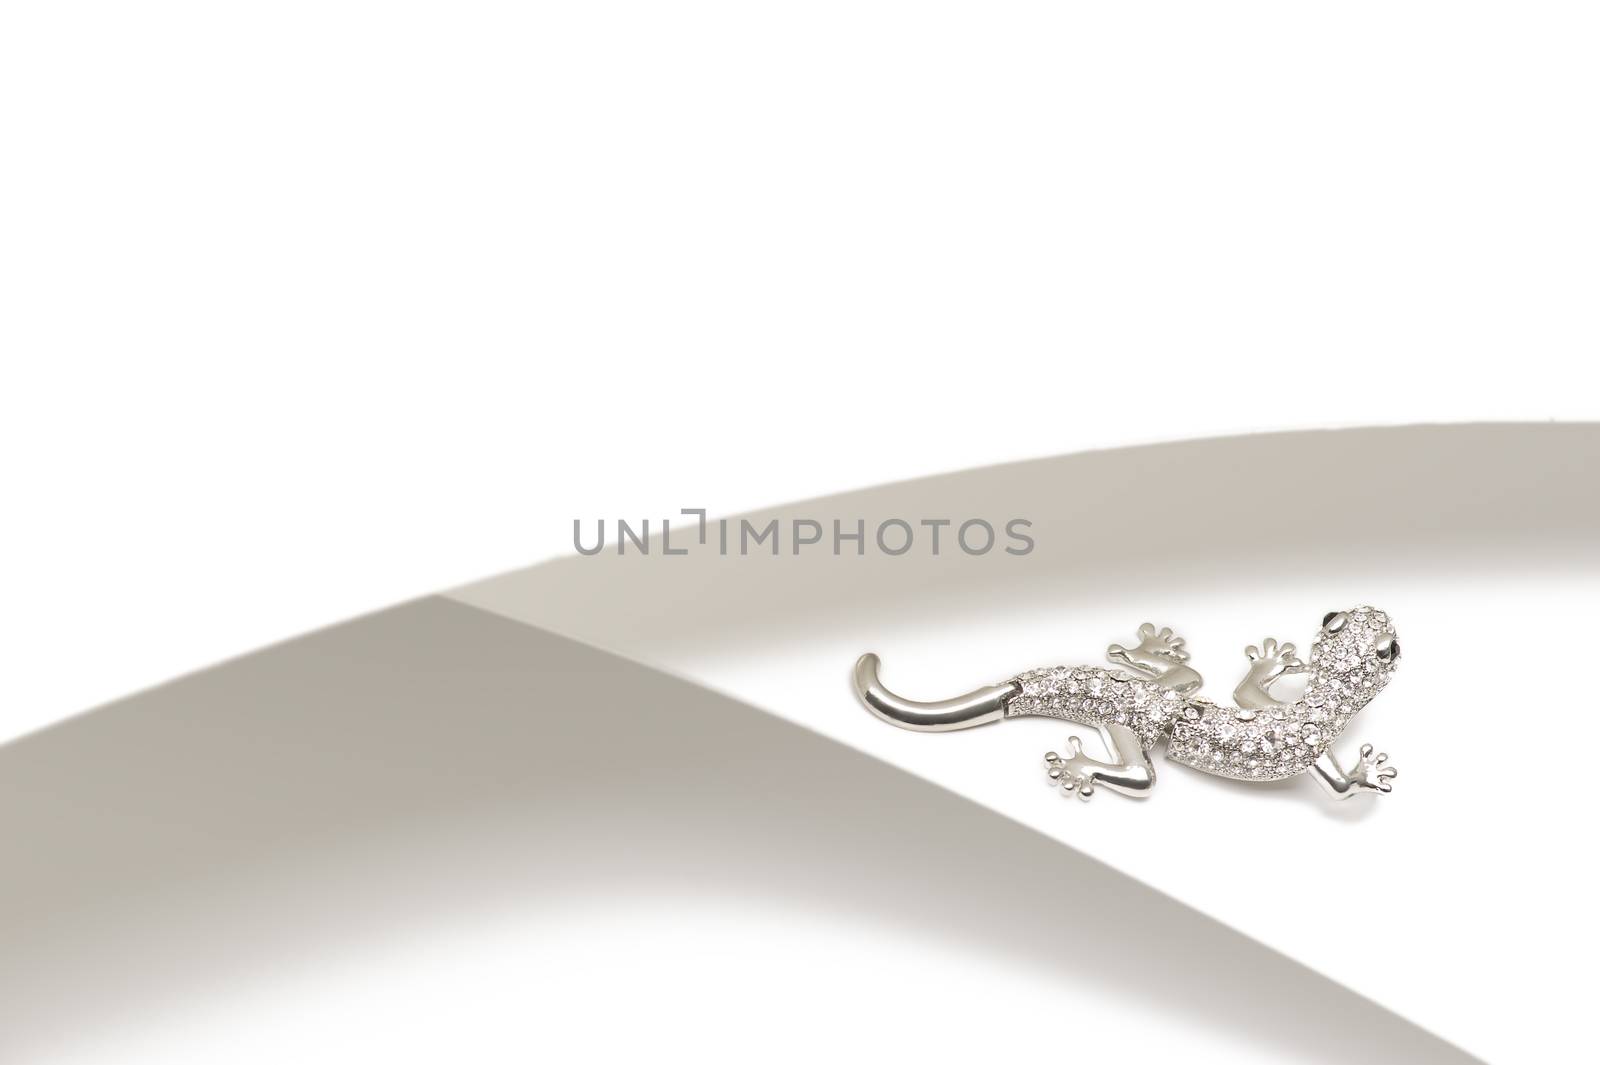 Silver gemstone lizard brooch set with shiny cubic zirconias or diamante for a chic fashion accessory on a bicolor silver and white background with copyspace